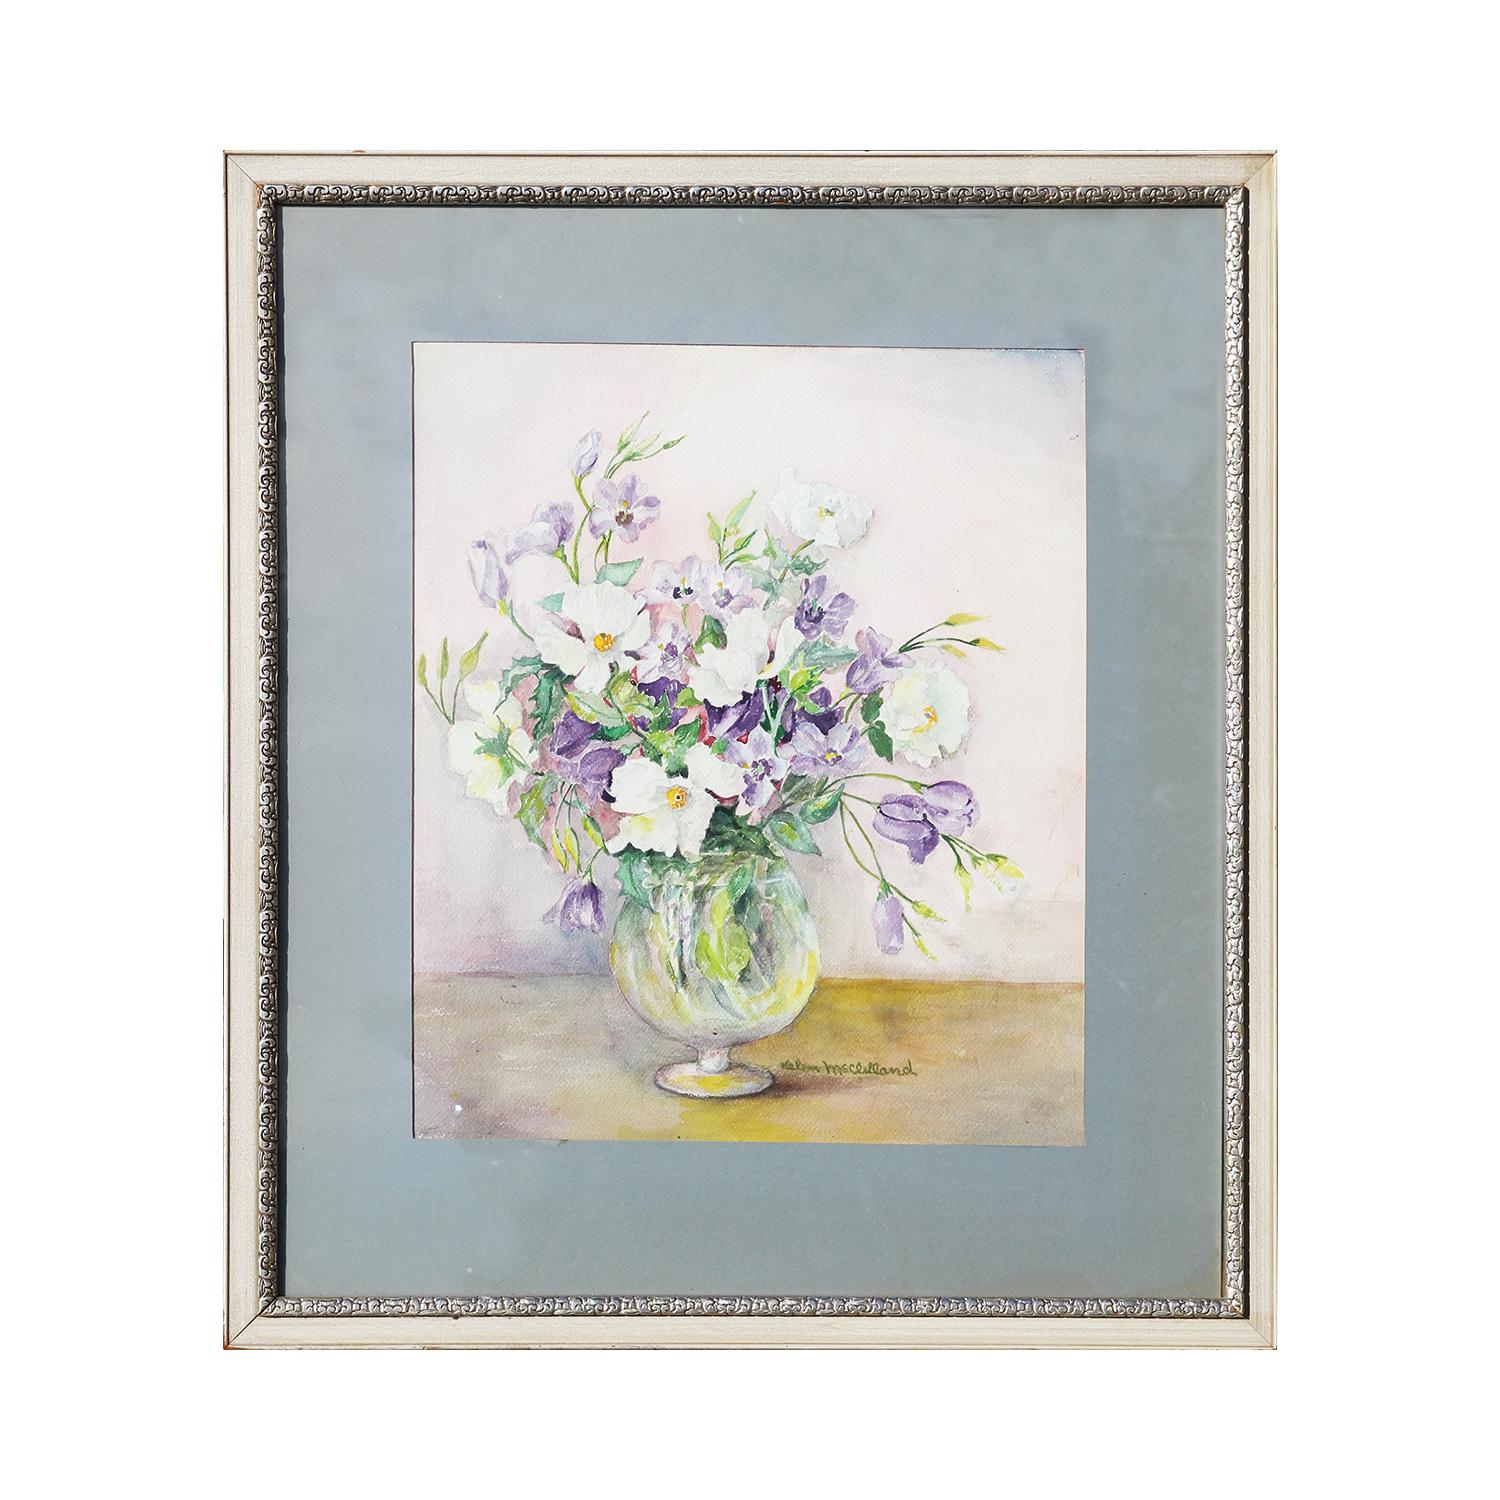 Small White and Purple Modernist Floral Still Life Irises Watercolor Painting  - Art by Helen McClelland